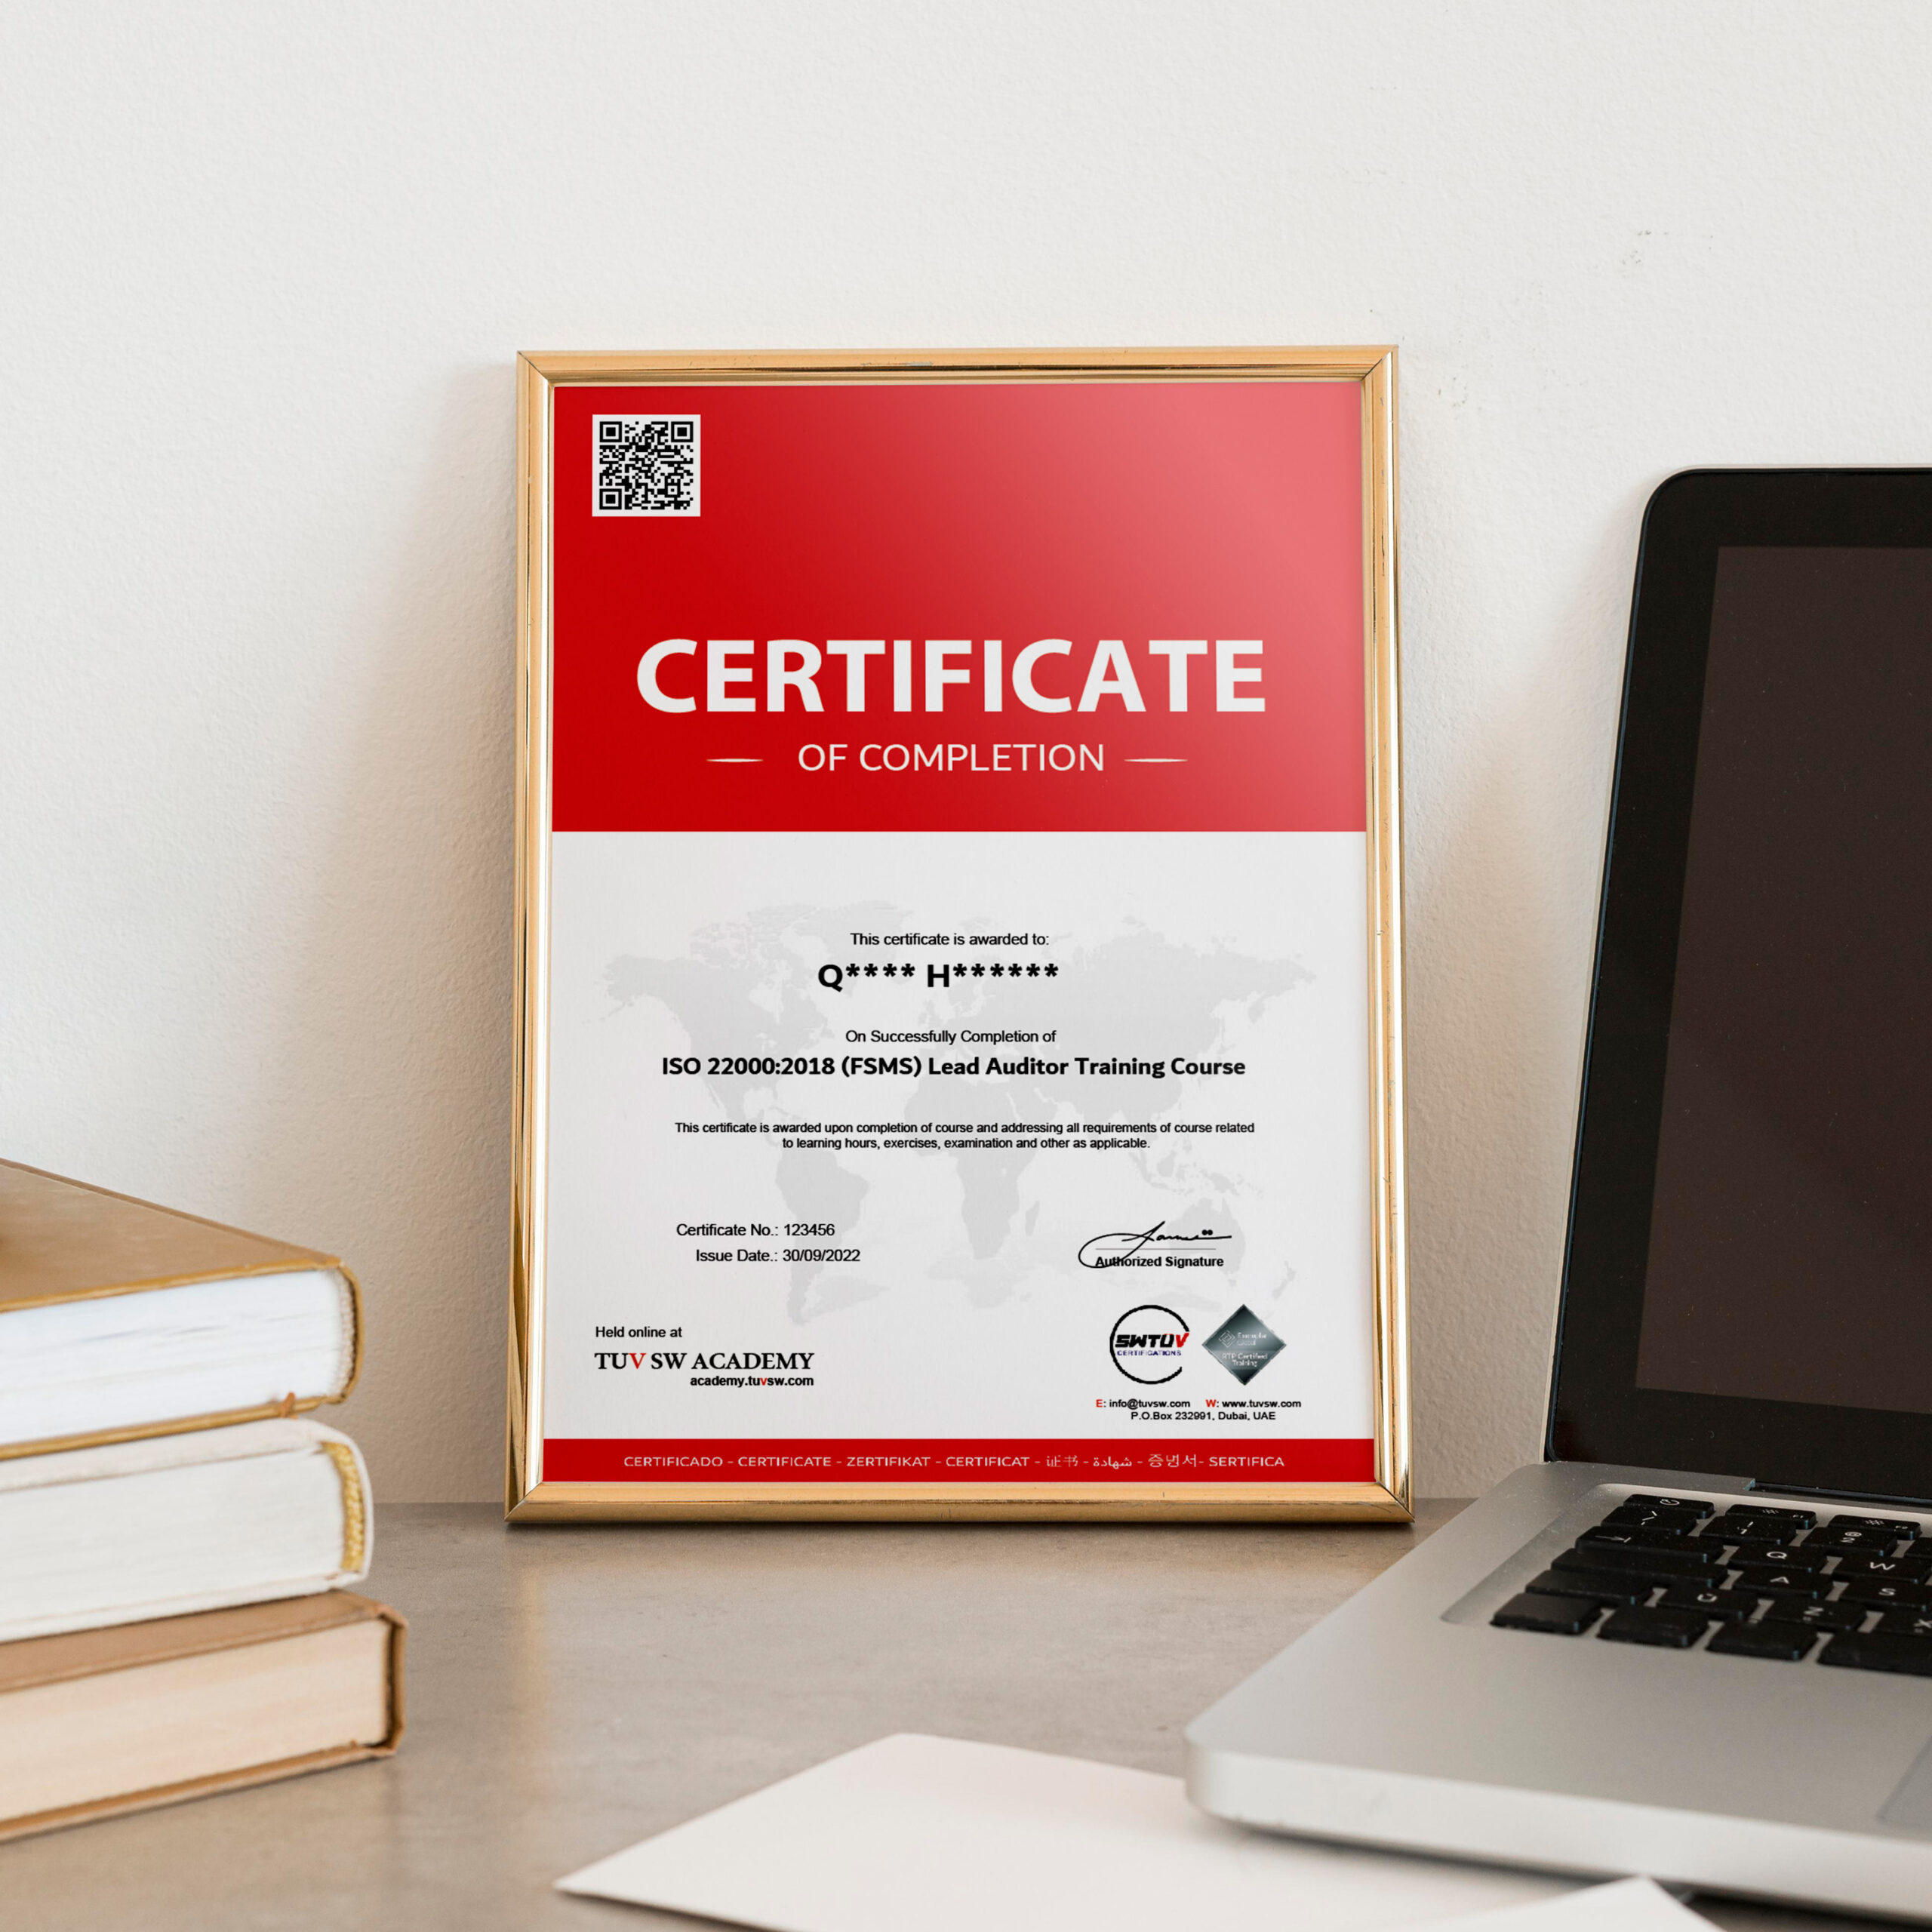 FSMS Sample Certificate Academy TUVSW@0.75x